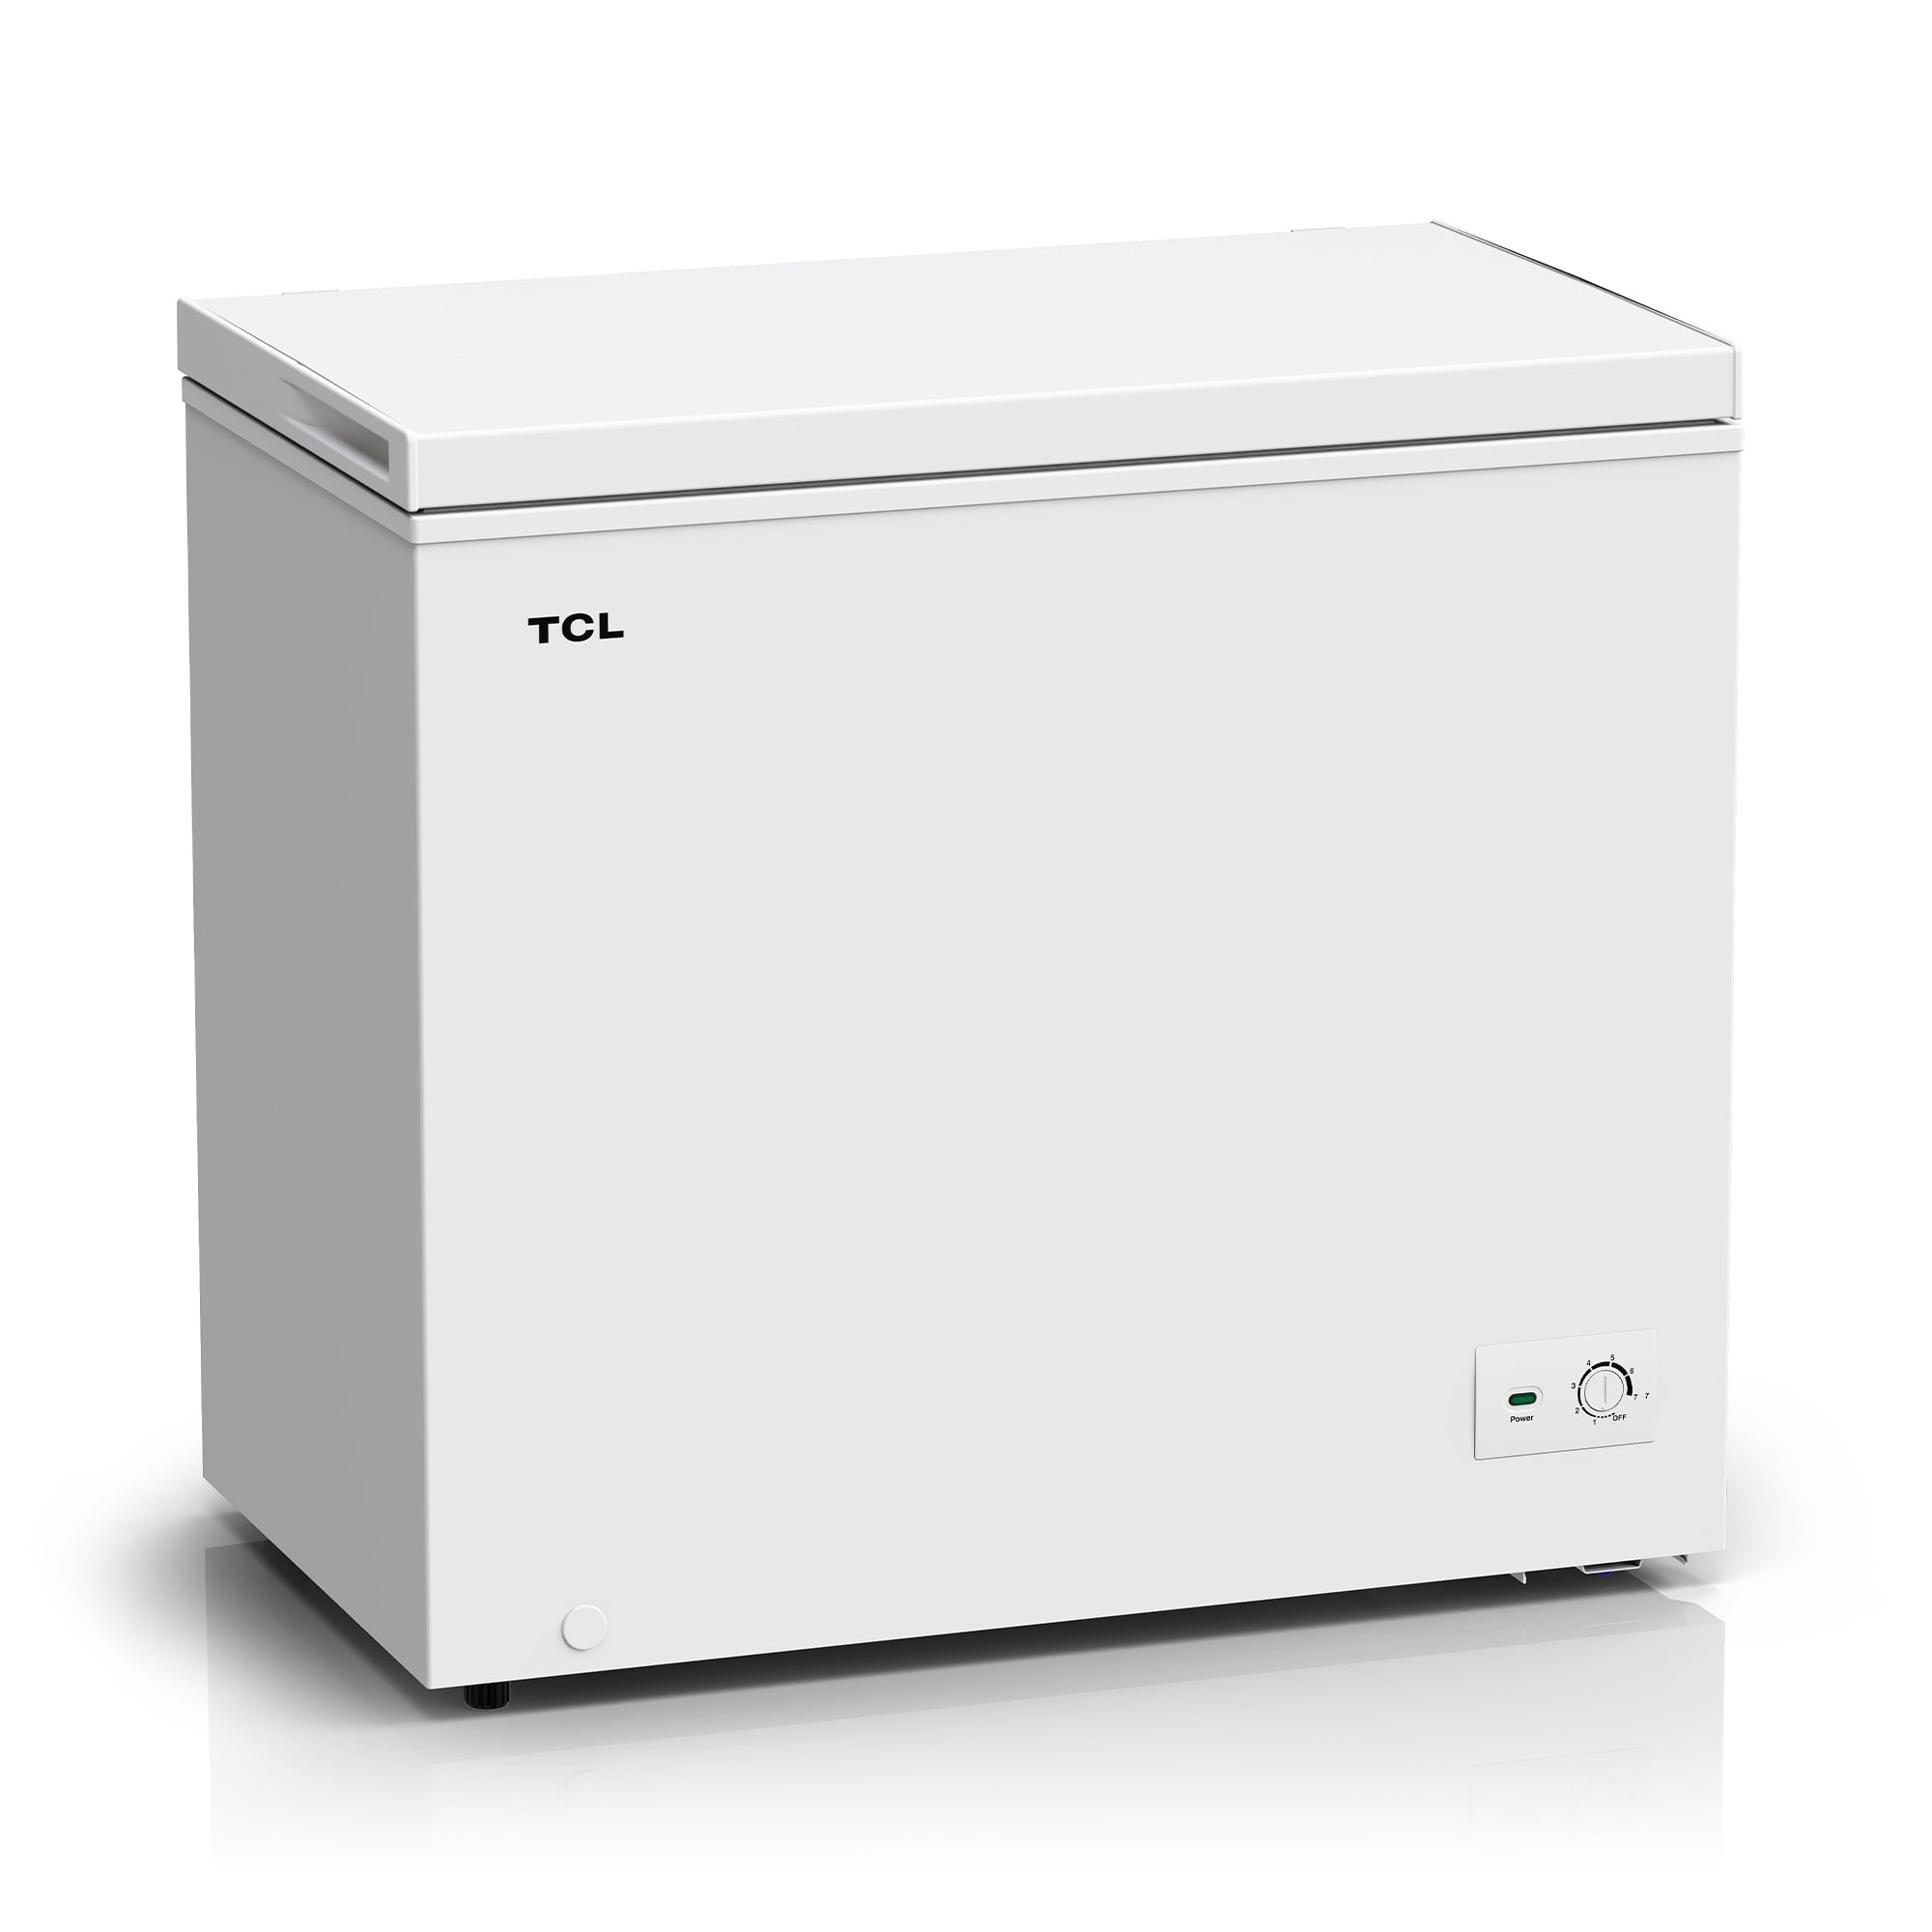 TCL 7.0 Cu. Ft. Chest Freezer (White, CF073W) $165.00 + Free Shipping